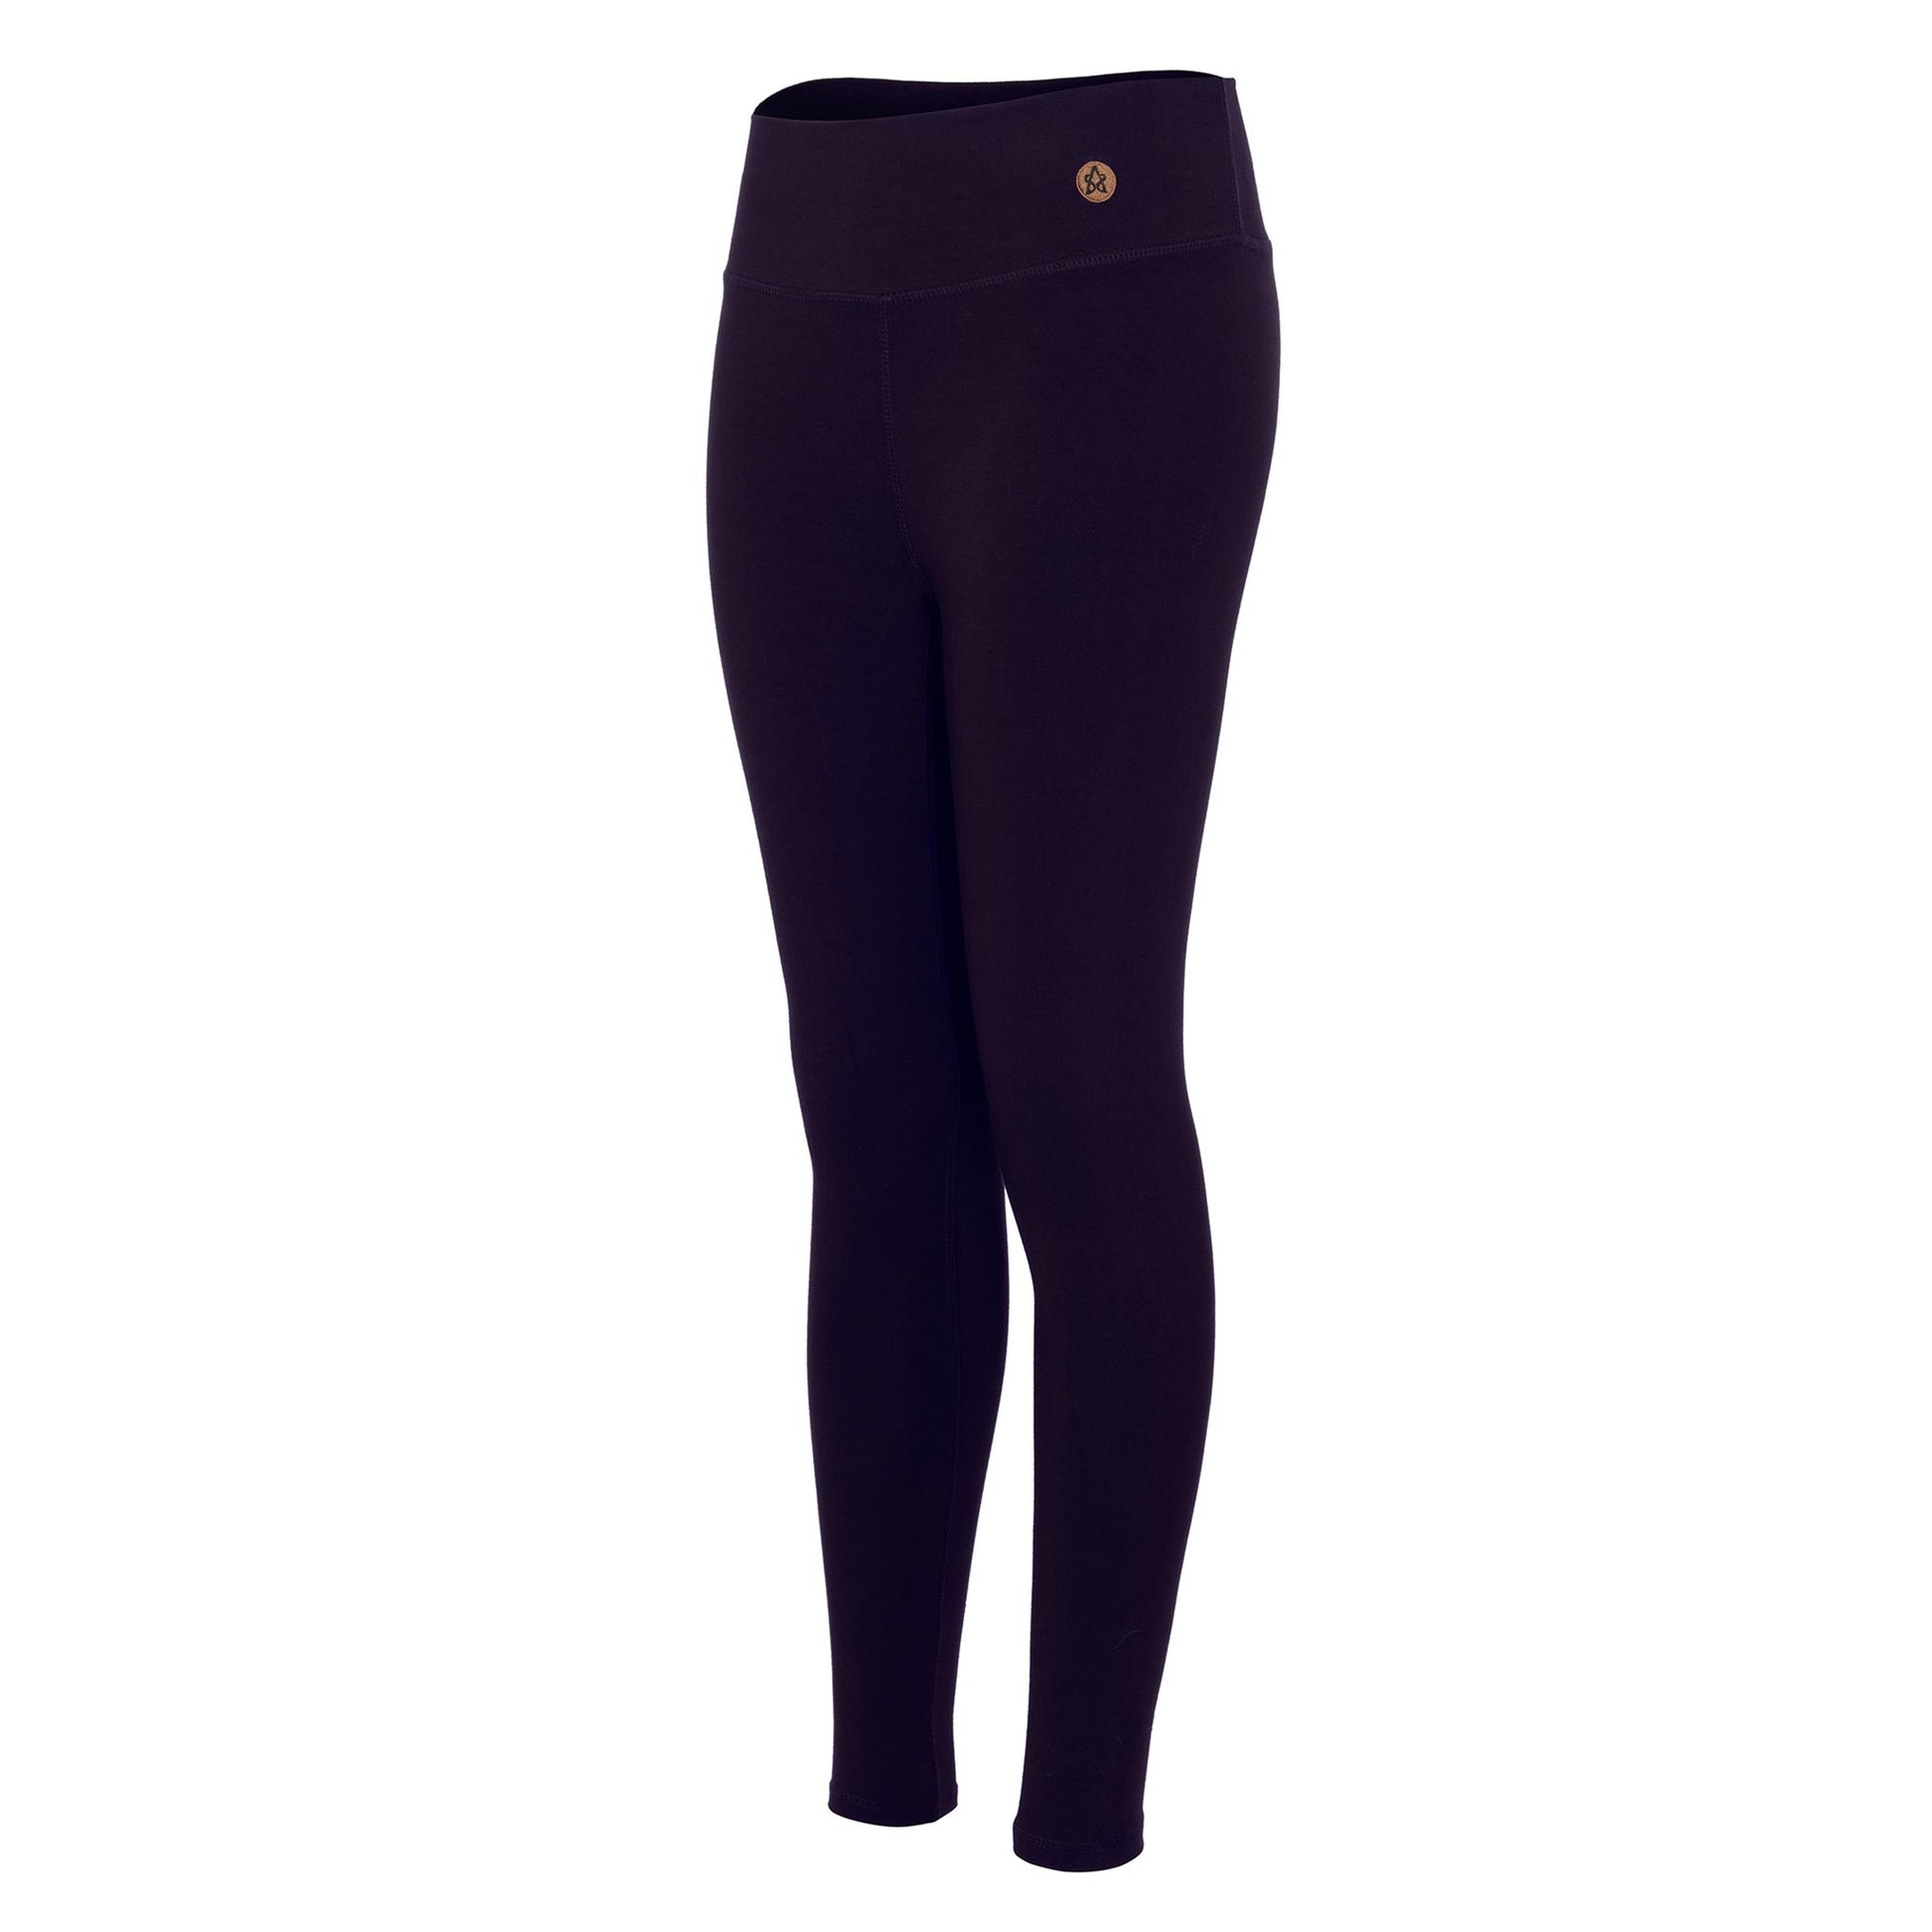 Me First Yoga Legging: Experience Unmatched Comfort and Style